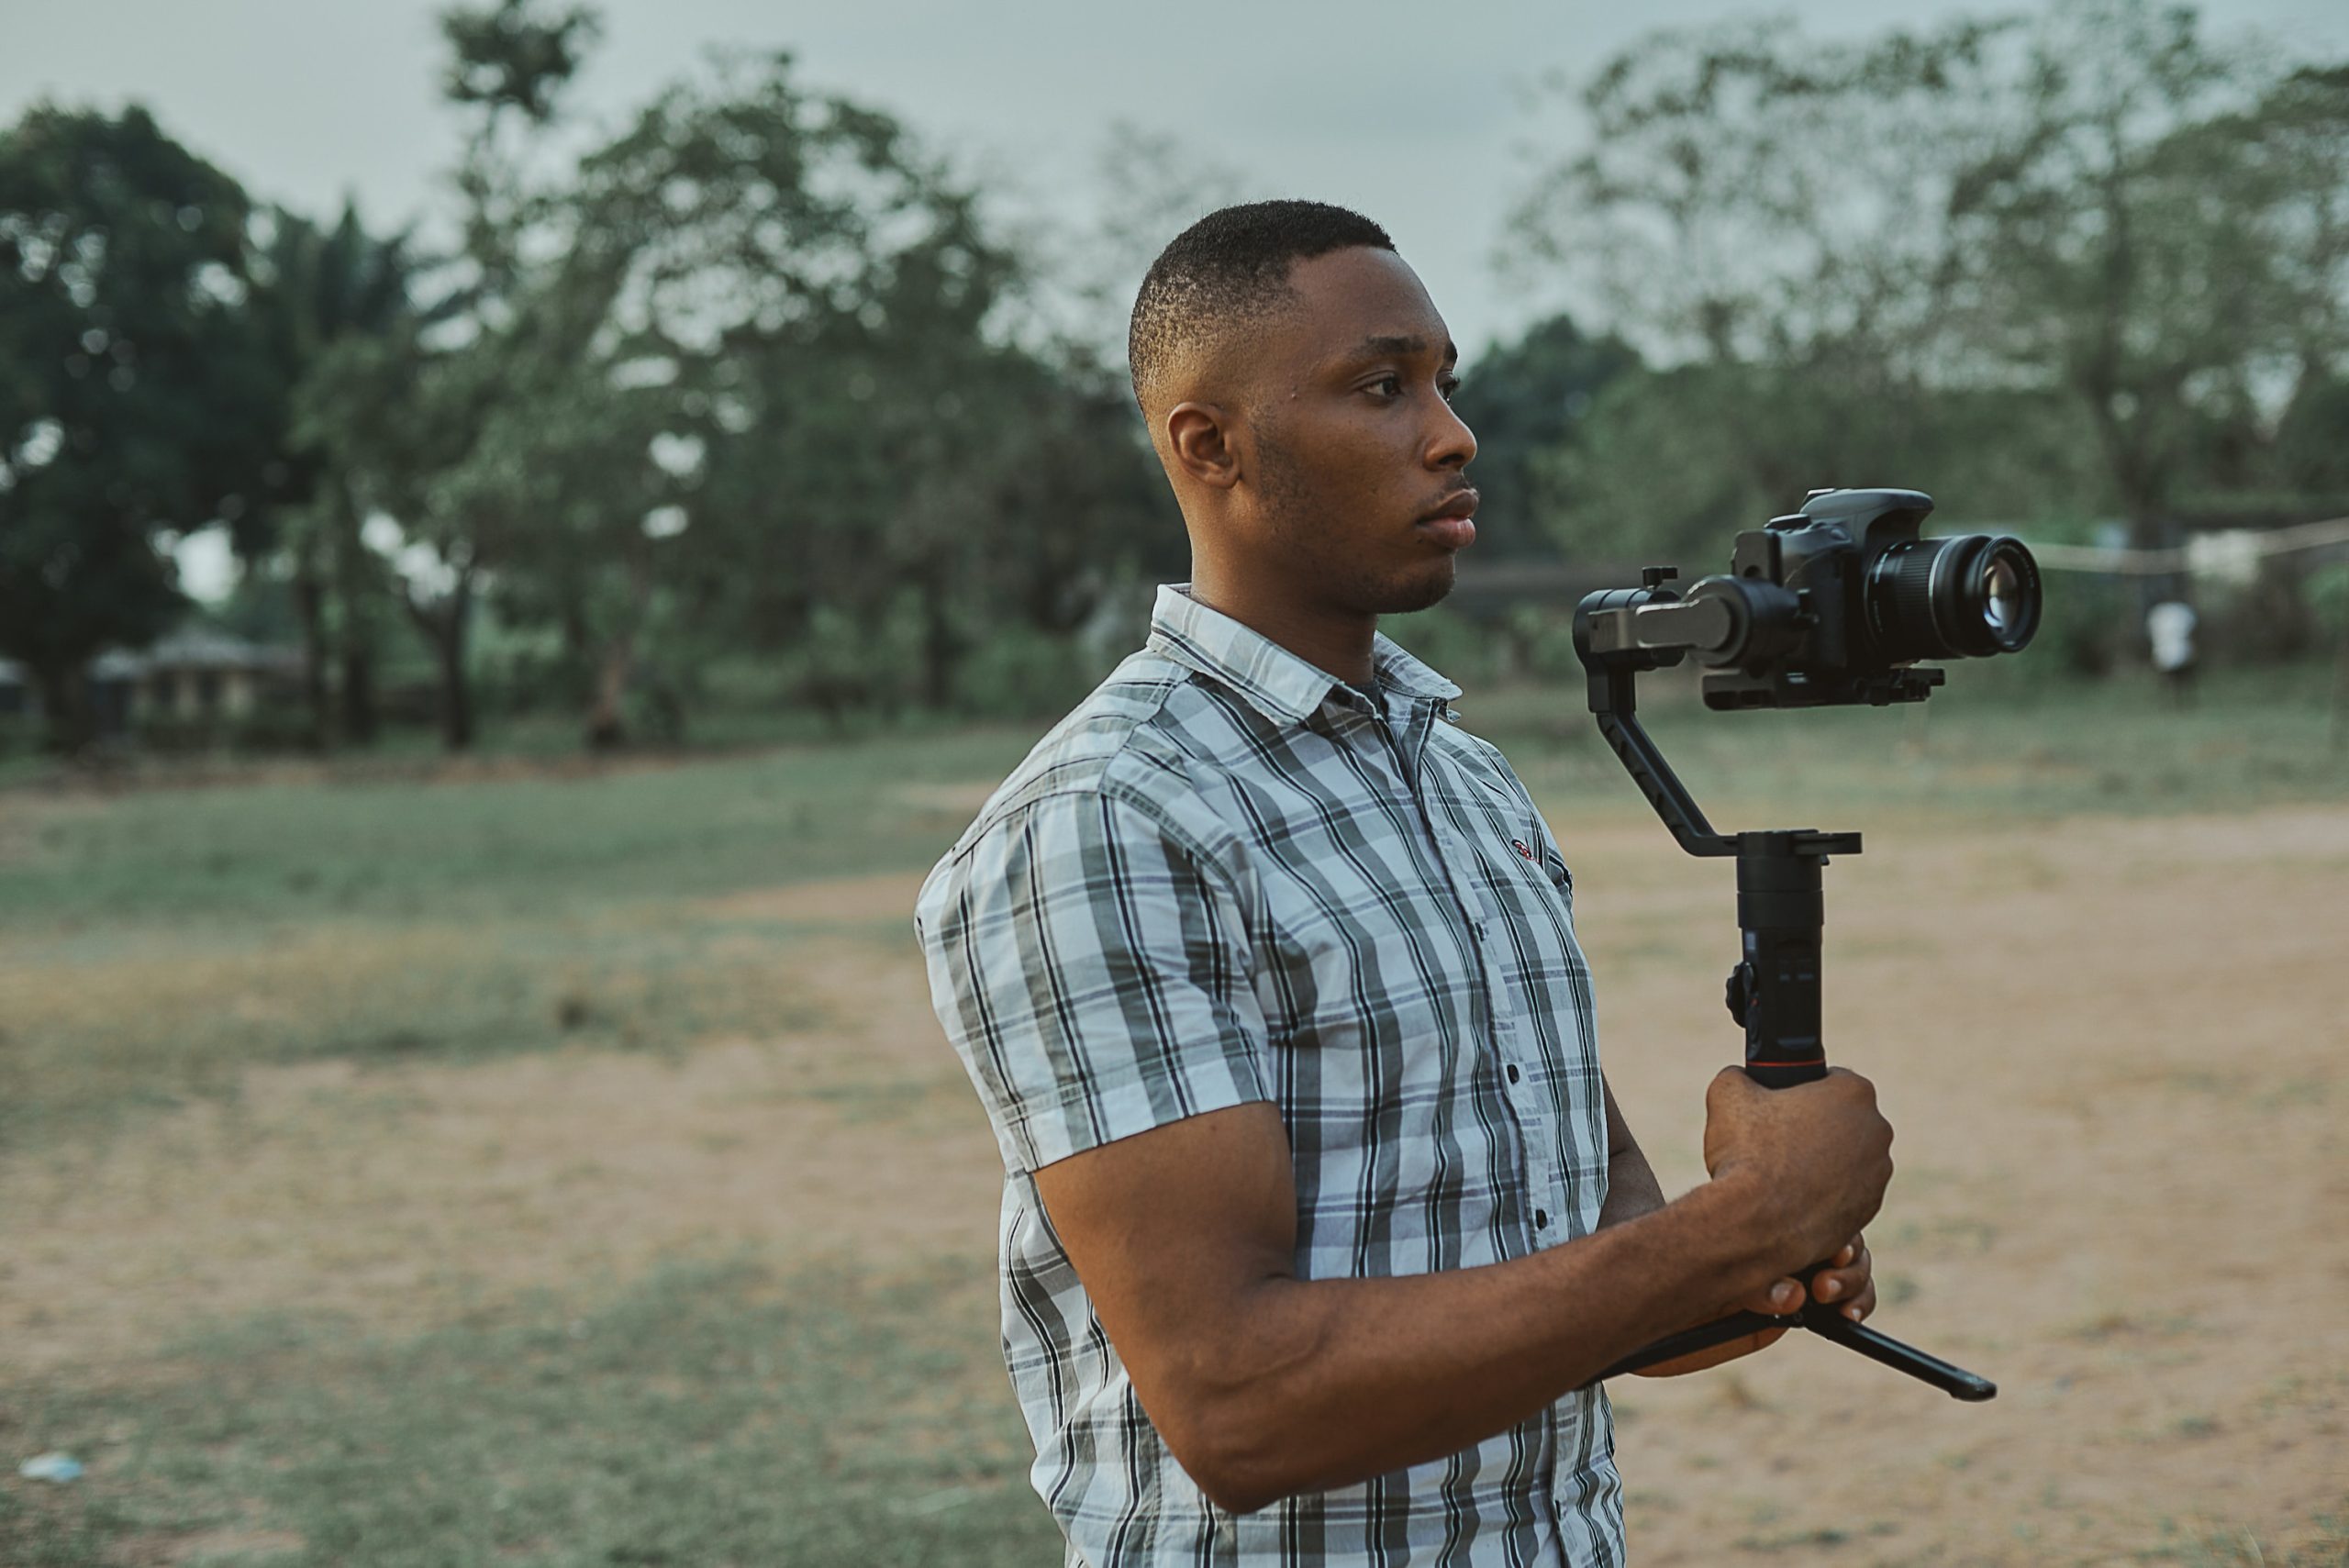 Filmmaker in Blue and White Plaid Button Up T-shirt Holding Black Dslr Camera on a gimbal. Get a Grip on your Video.